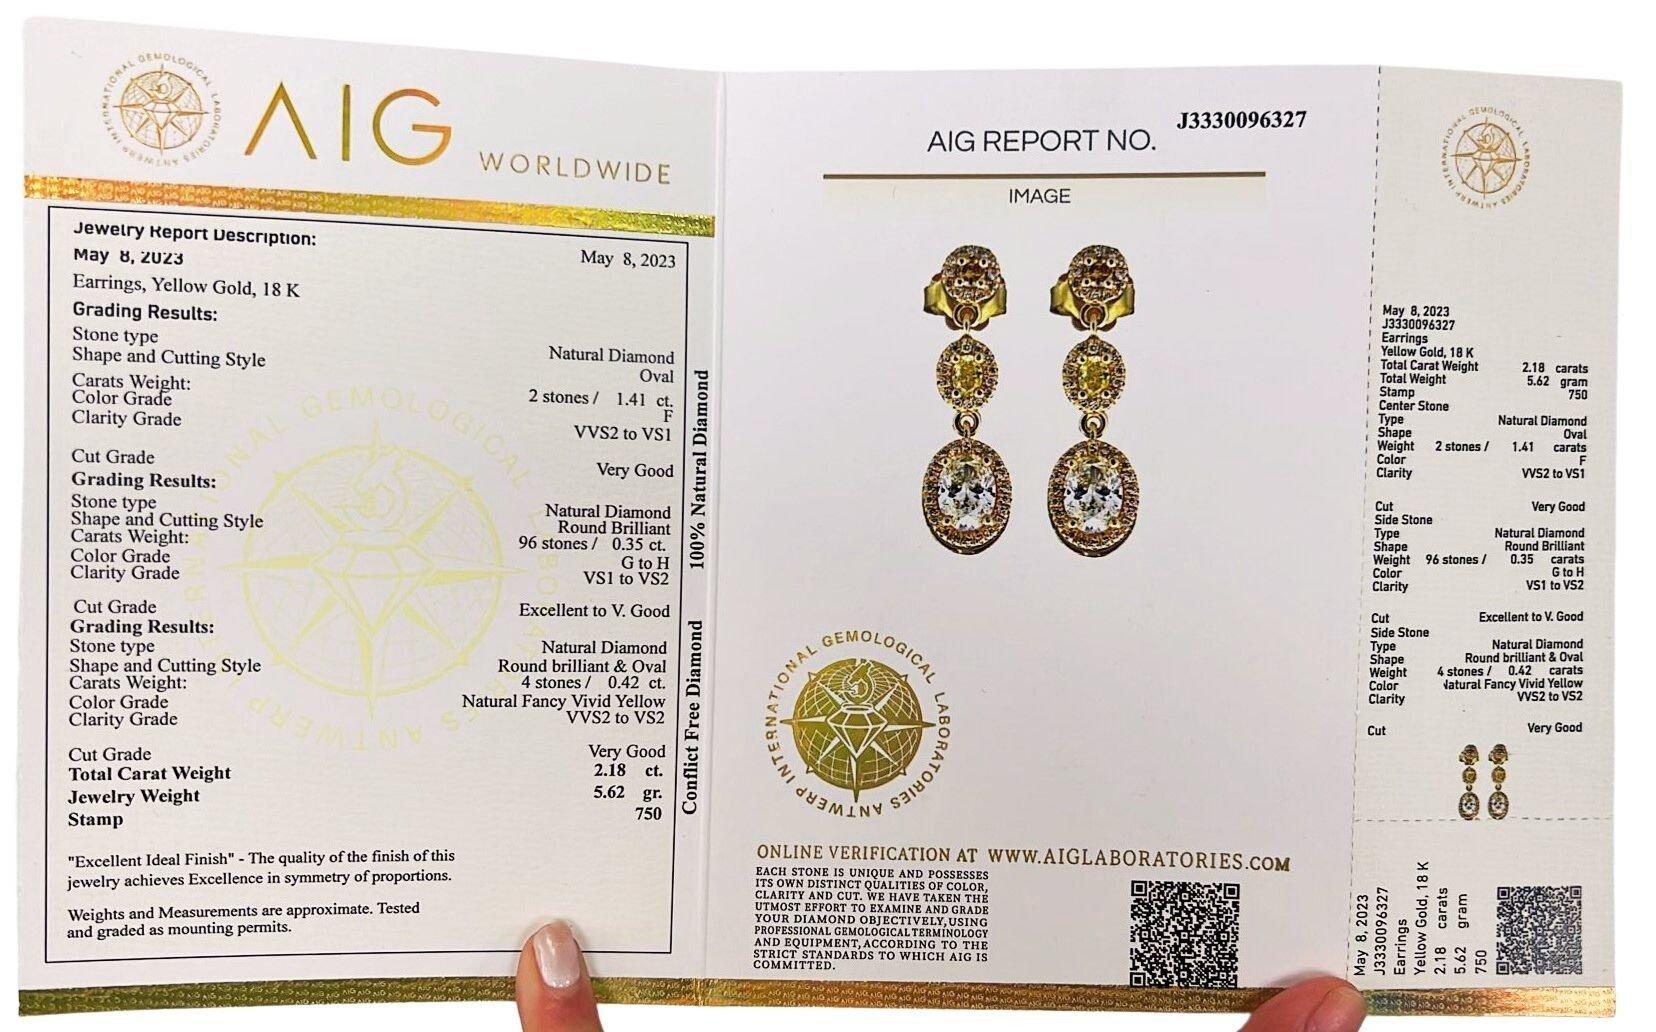 A stylish pair of three-layered earrings with dazzling 1.41-carat oval natural diamonds. It has 0.77 carats of side diamonds which add more to its elegance. The jewelry is made of 18K Yellow Gold with a high-quality polish. It comes with an AIG